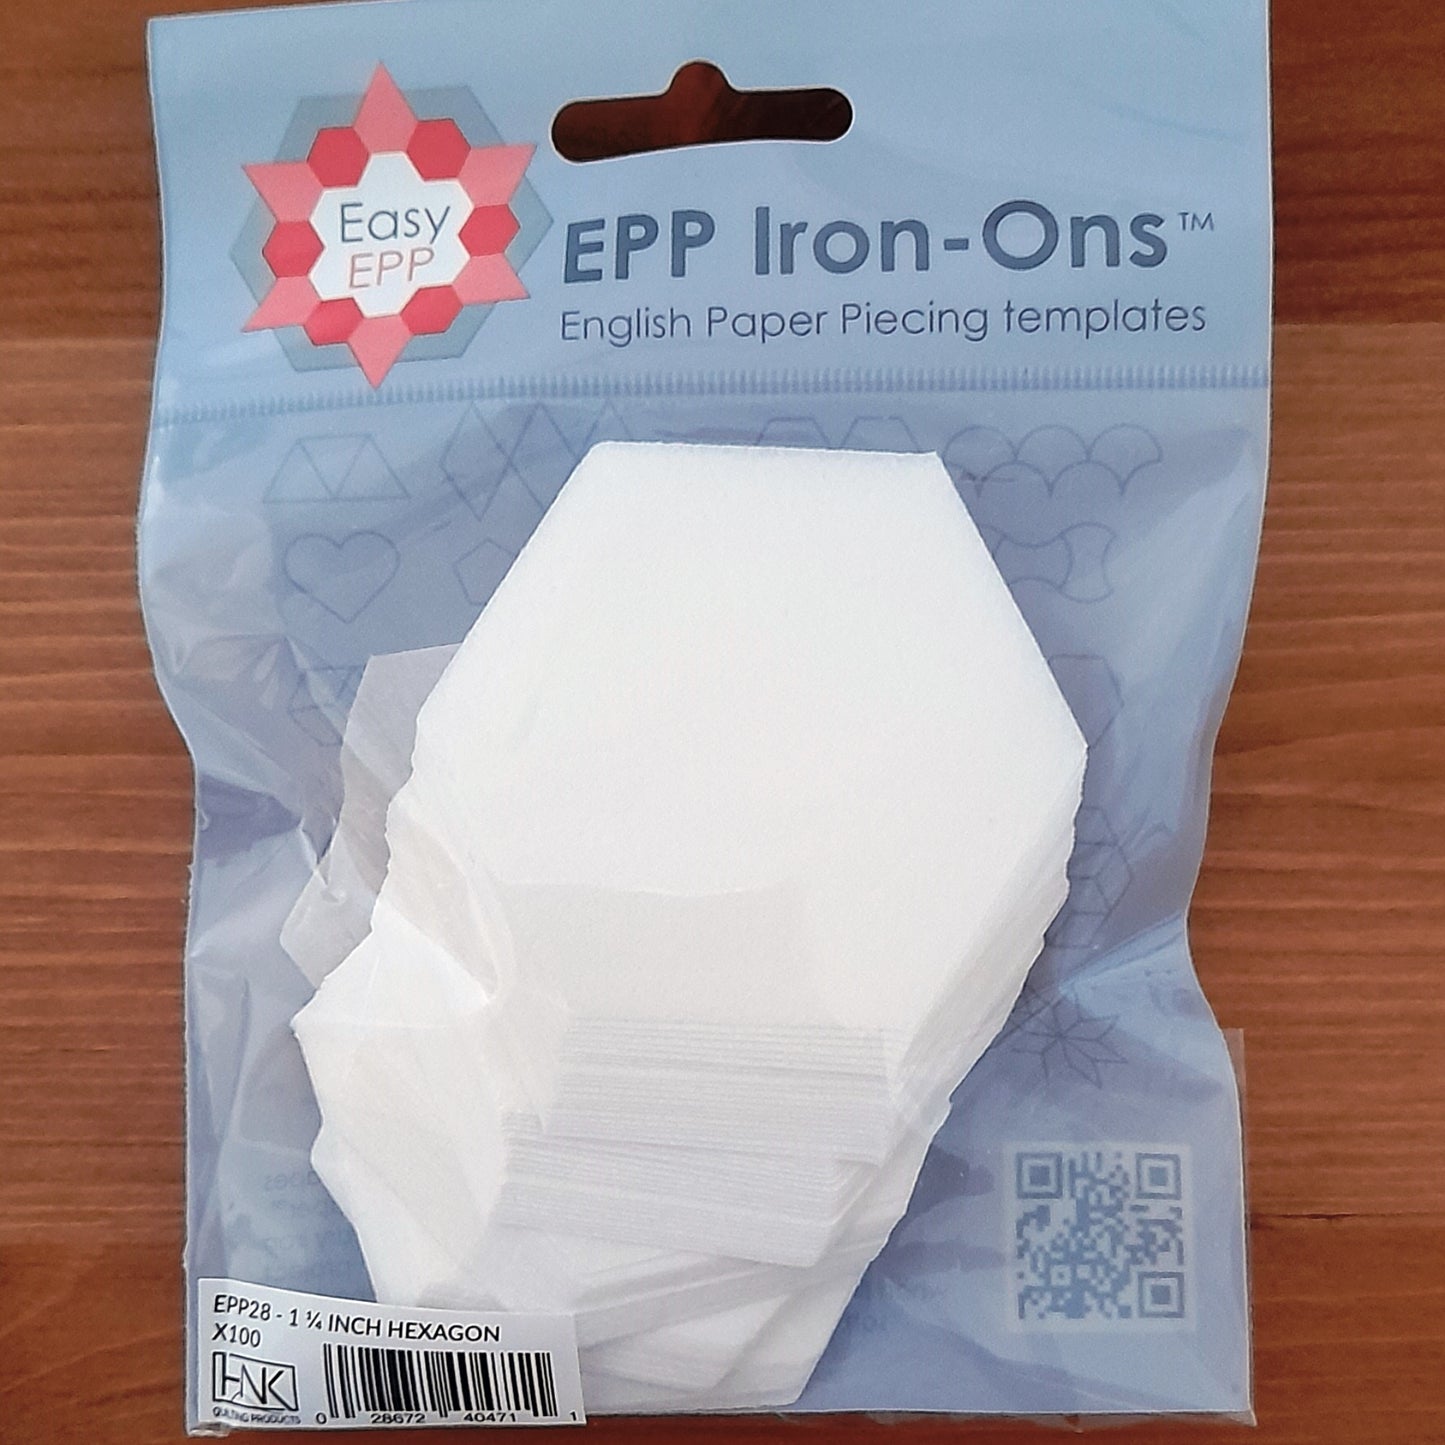 Hexagons 1 & 1/4", 100 fusible iron on papers for EPP English Paper Piecing Hugs n Kisses